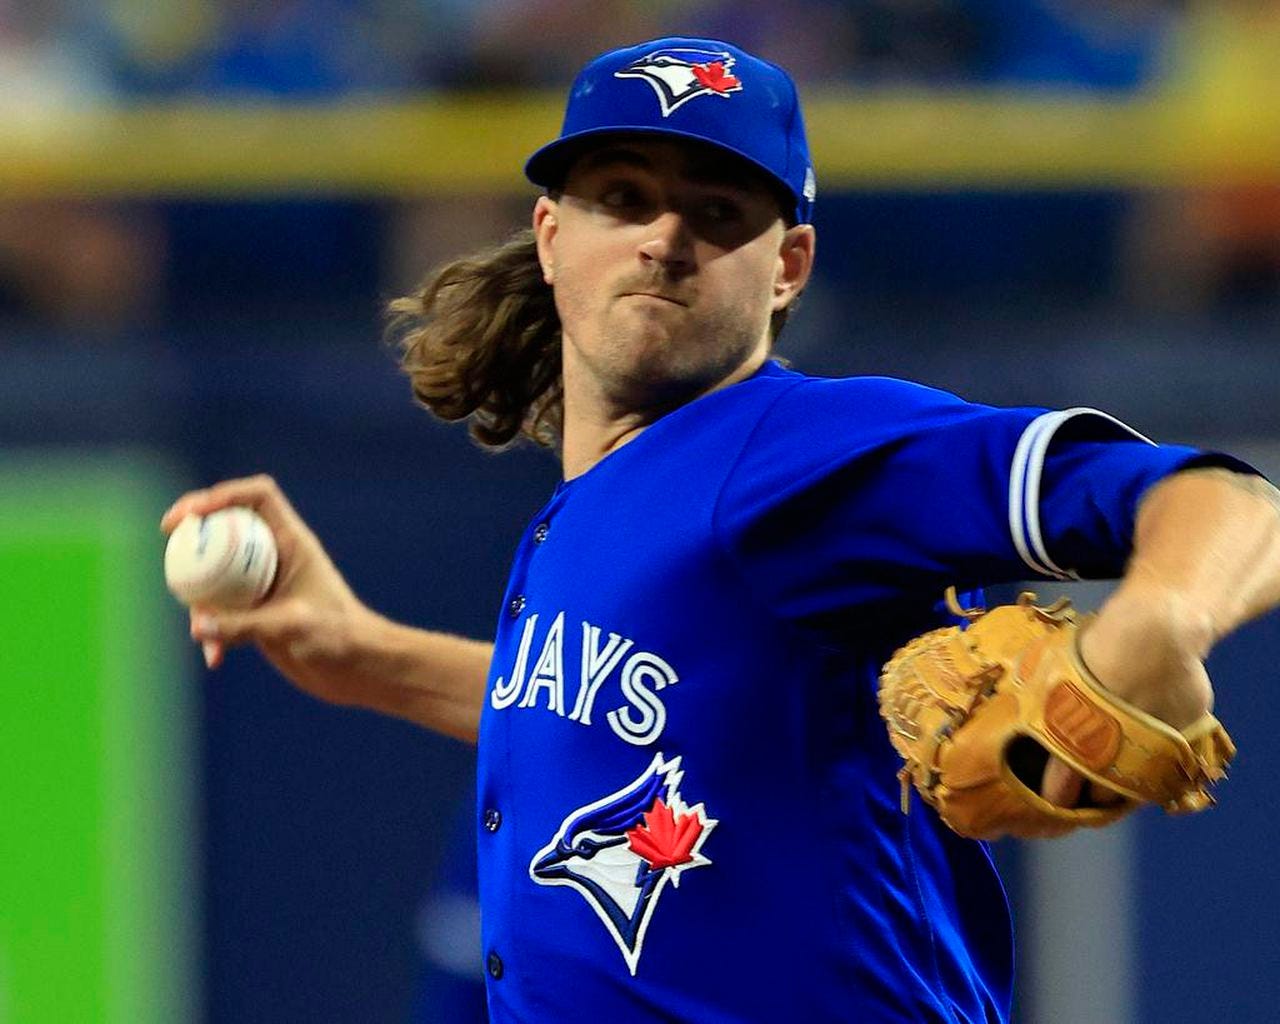 Jays' Kevin Gausman was a one-hit wonder in win over Rays | The Star